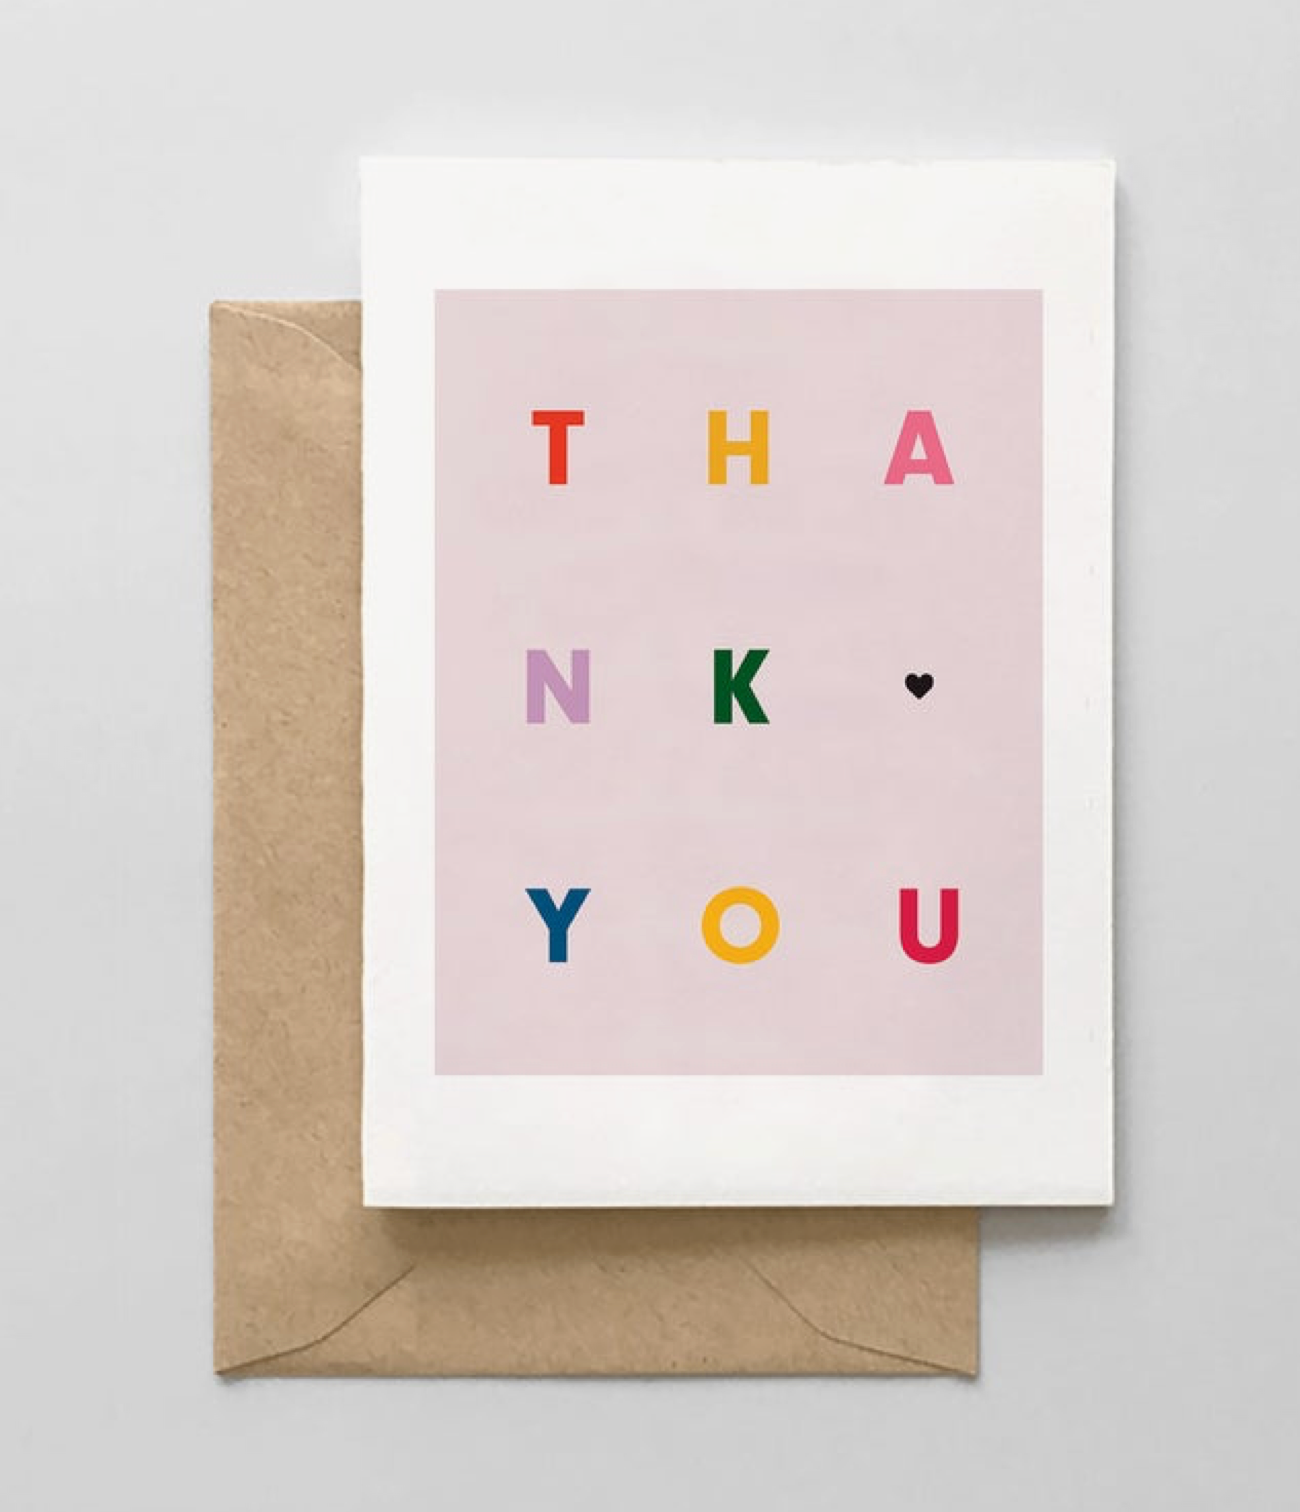 Thank You Cards Set